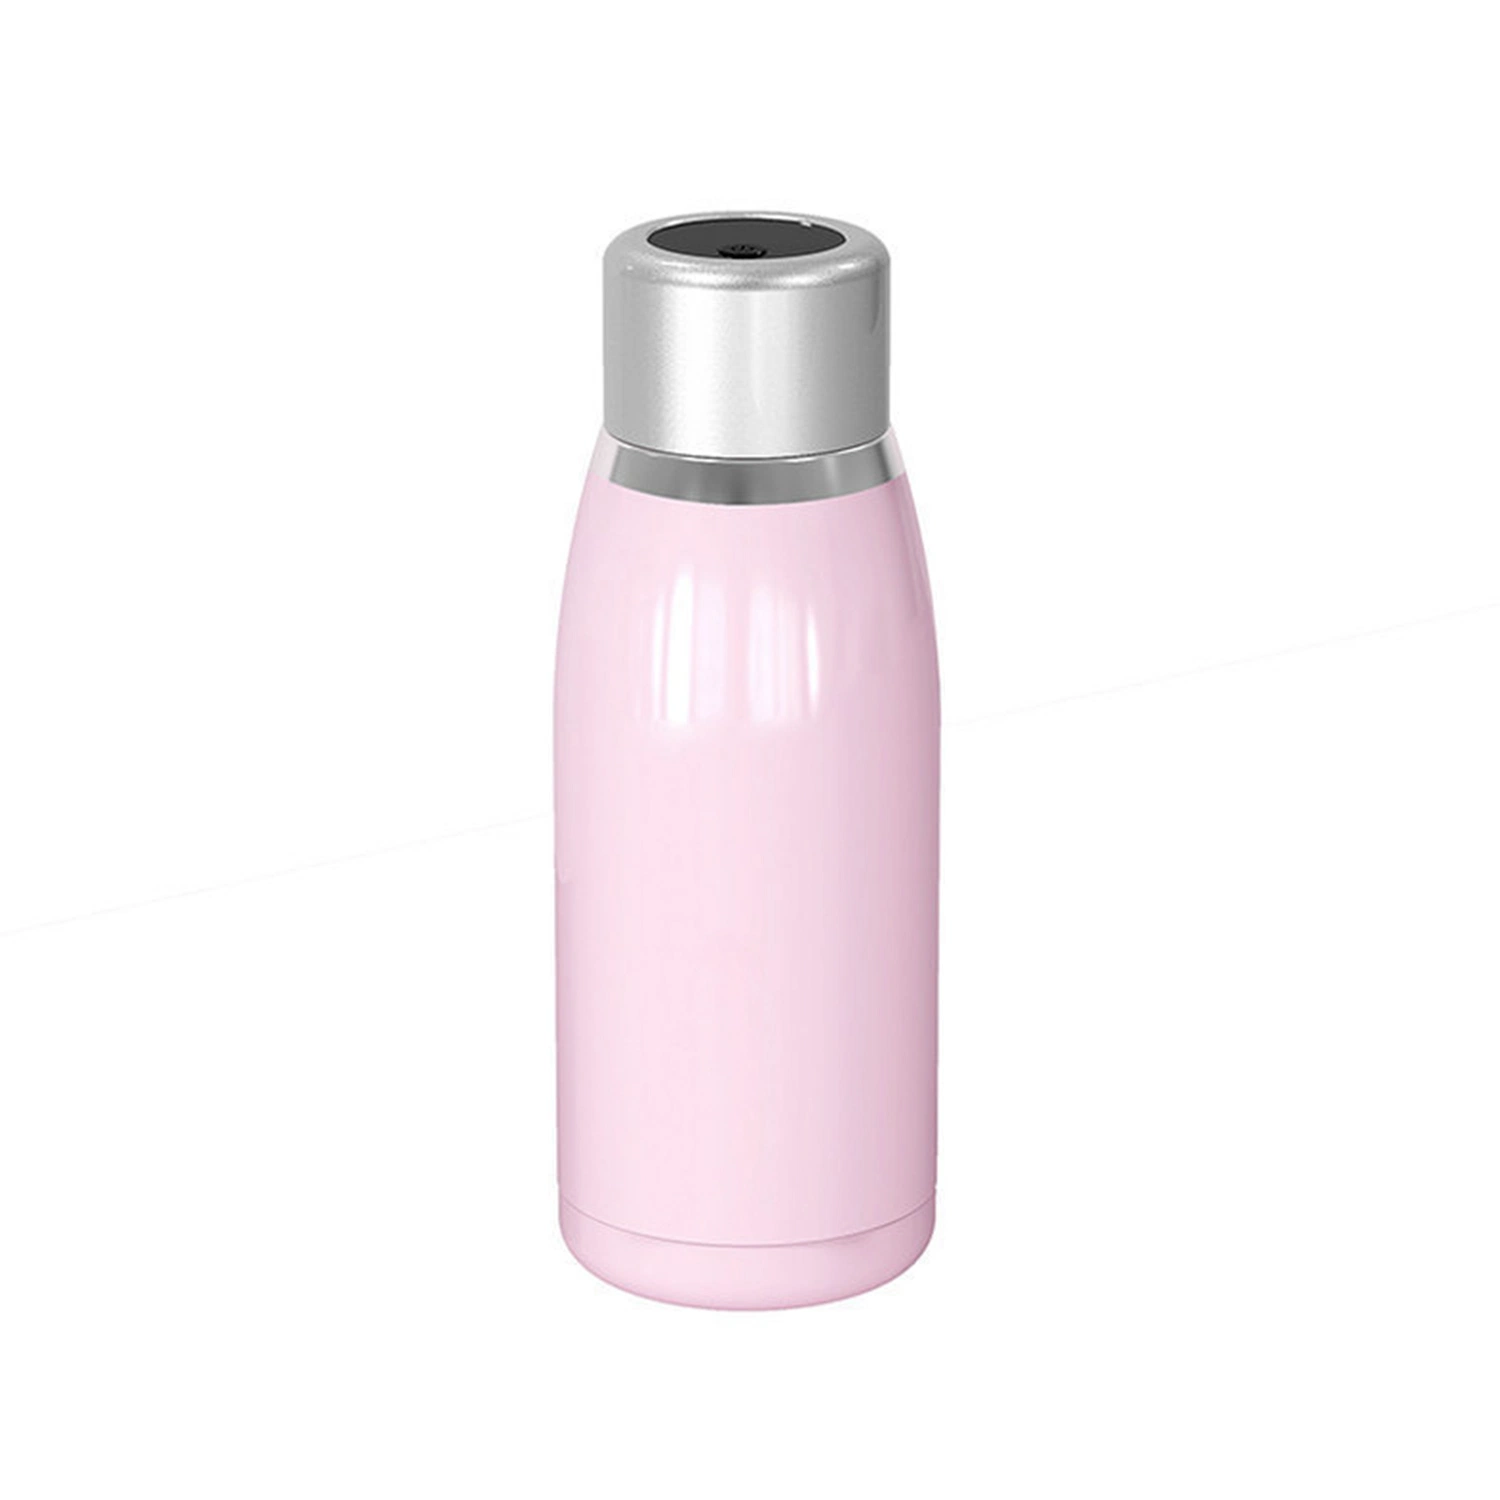 Small Capacity Stainless Steel Vacuum Flask Water Bottle Insulated Portable Travel Cup UV